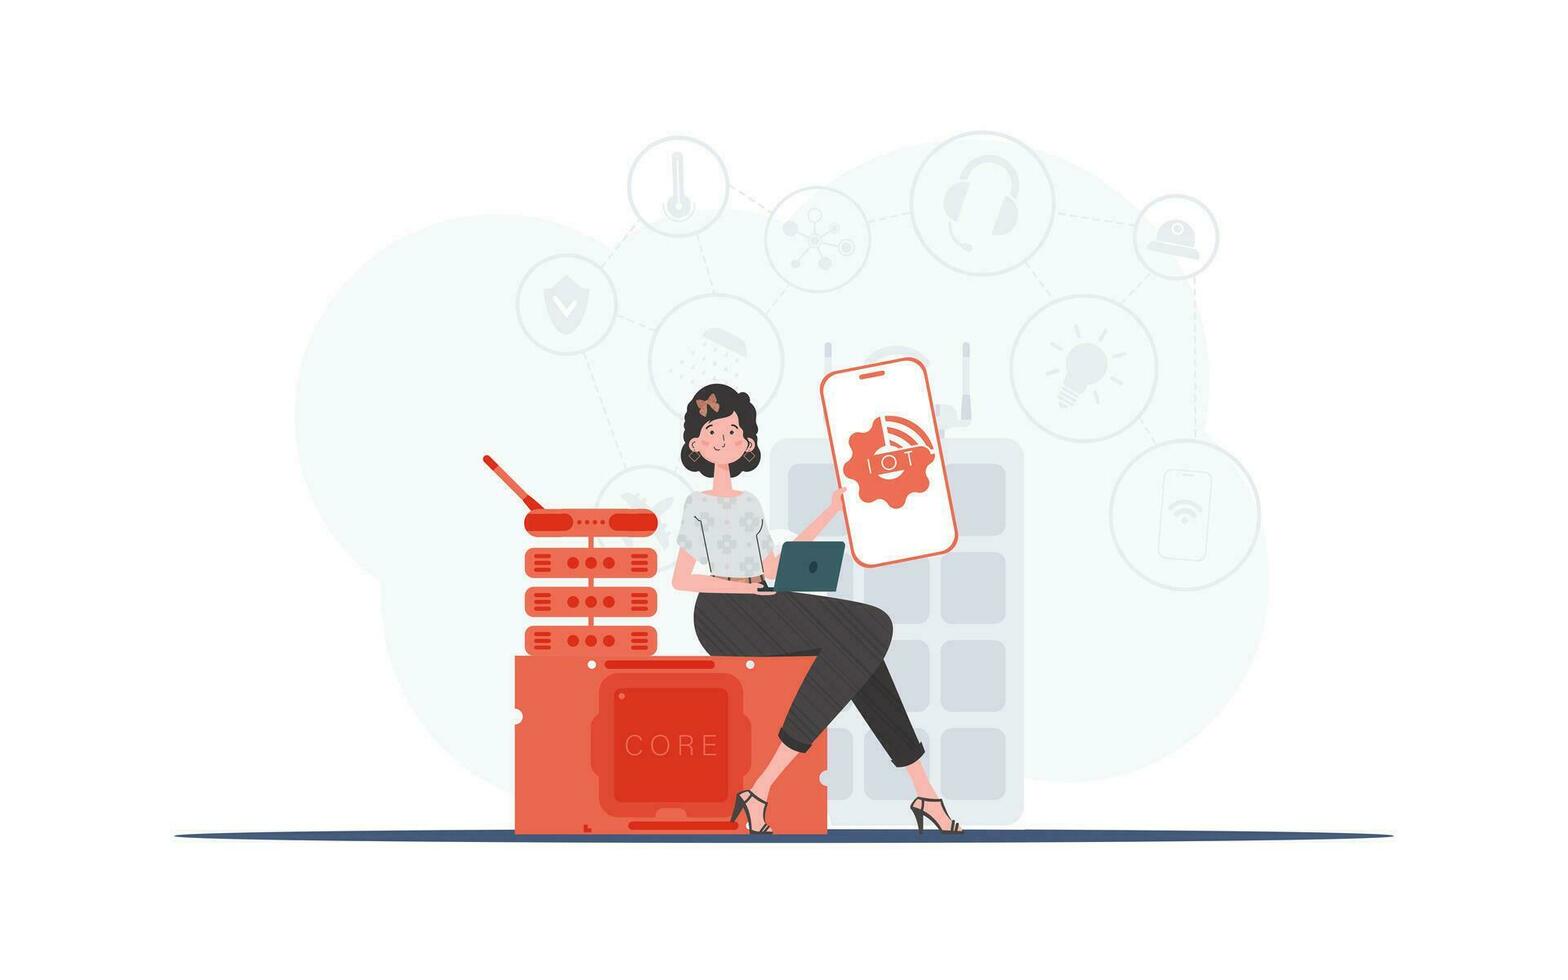 IOT and automation concept. The girl is holding a phone with the IoT logo in her hands. Vector illustration in trendy flat style.